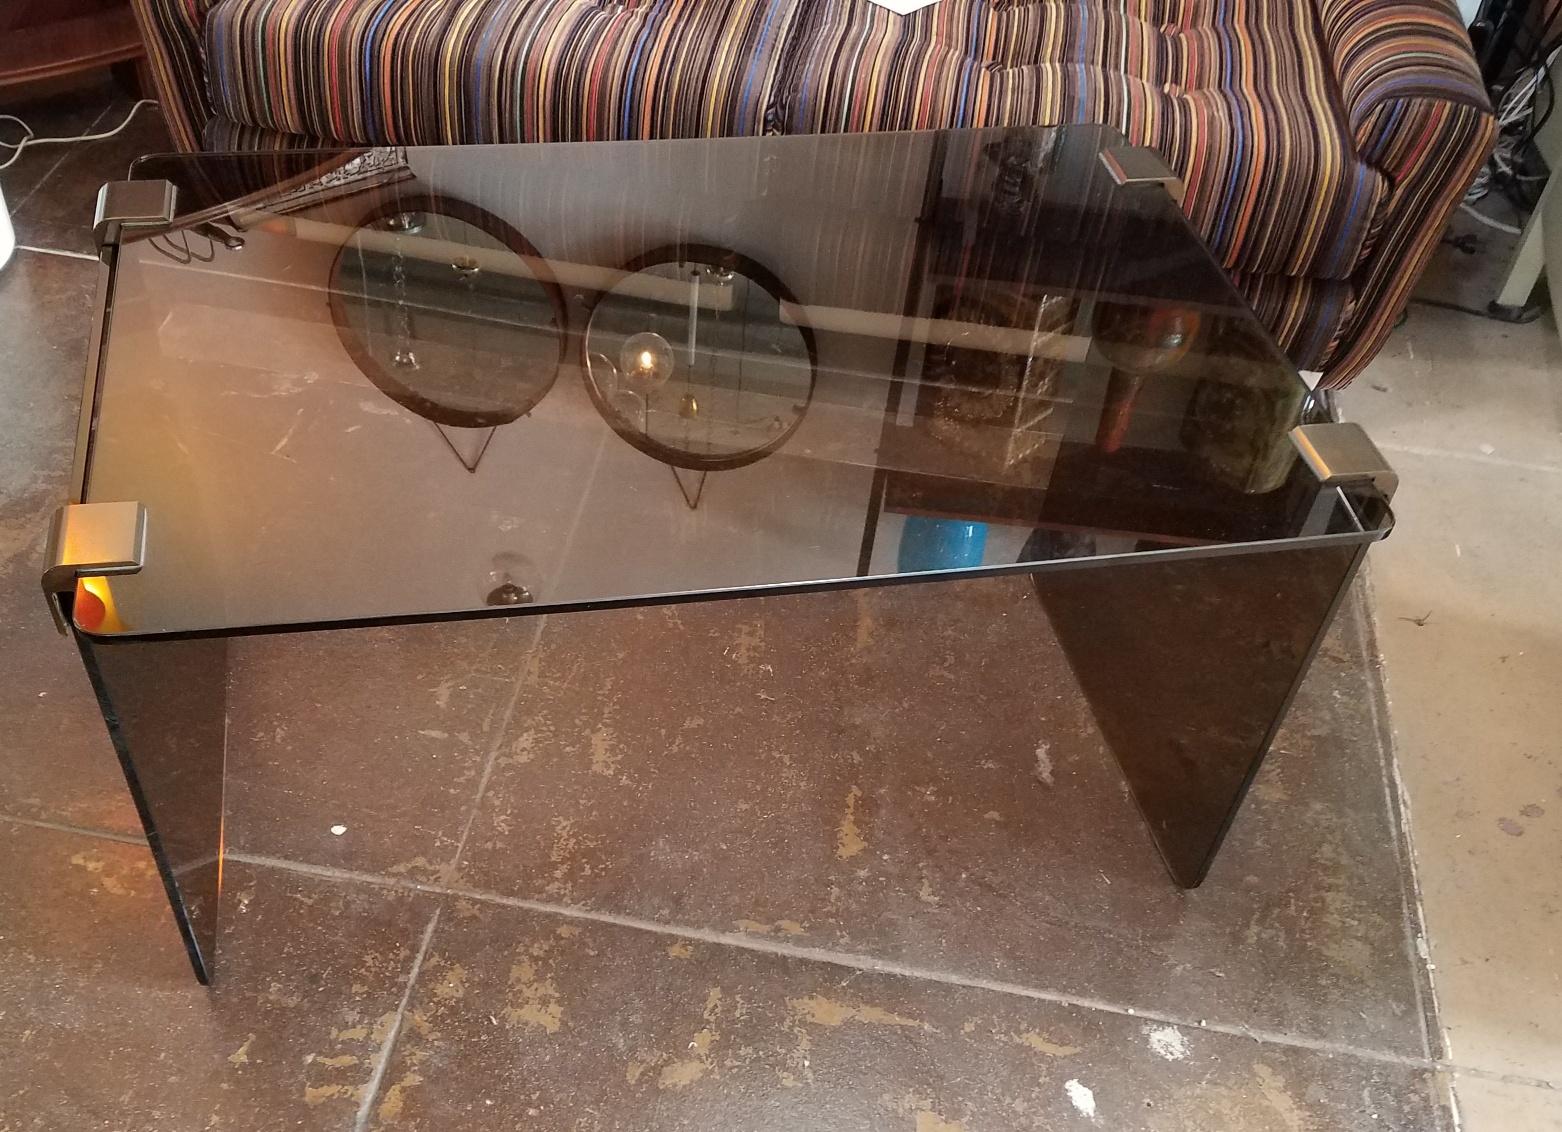 Italian 1960s smoke glass table by Pace Collection. Table can be reassemble when bronze glass holder unscrewed.
Shipping to US continental in home delivery $300